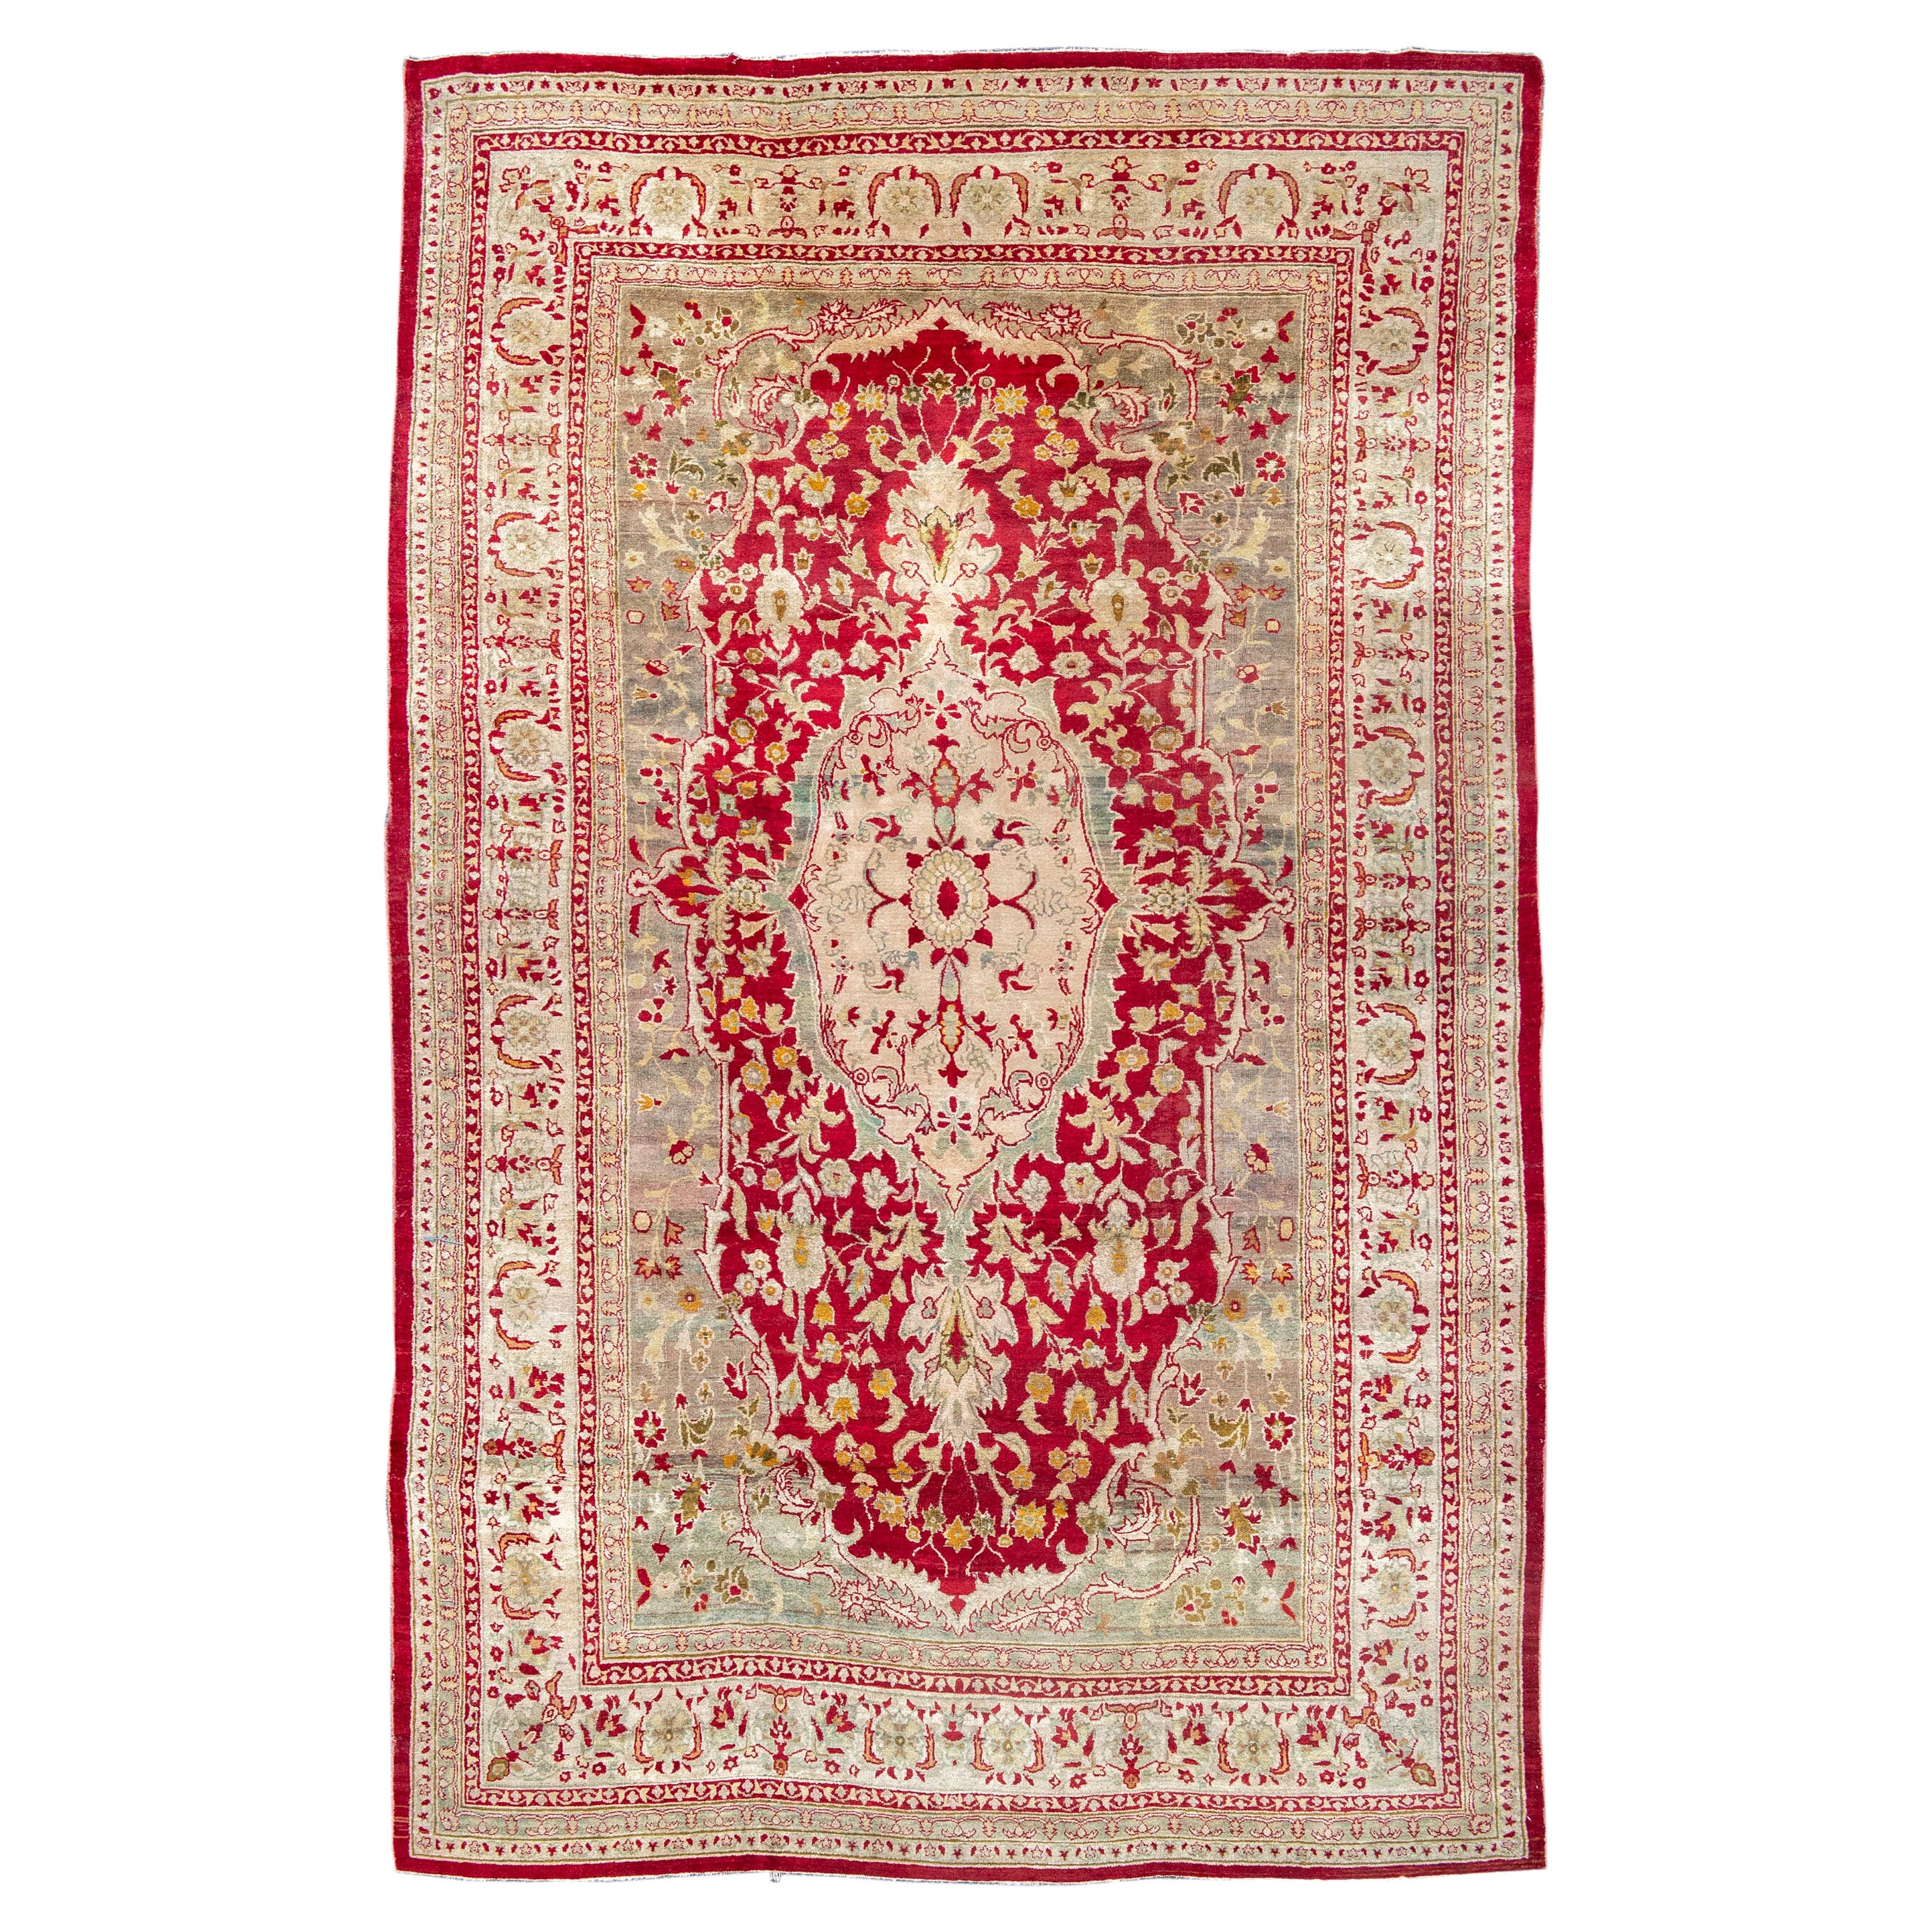 Antique Red and Gold Indian Agra Carpet, Late 19th Century